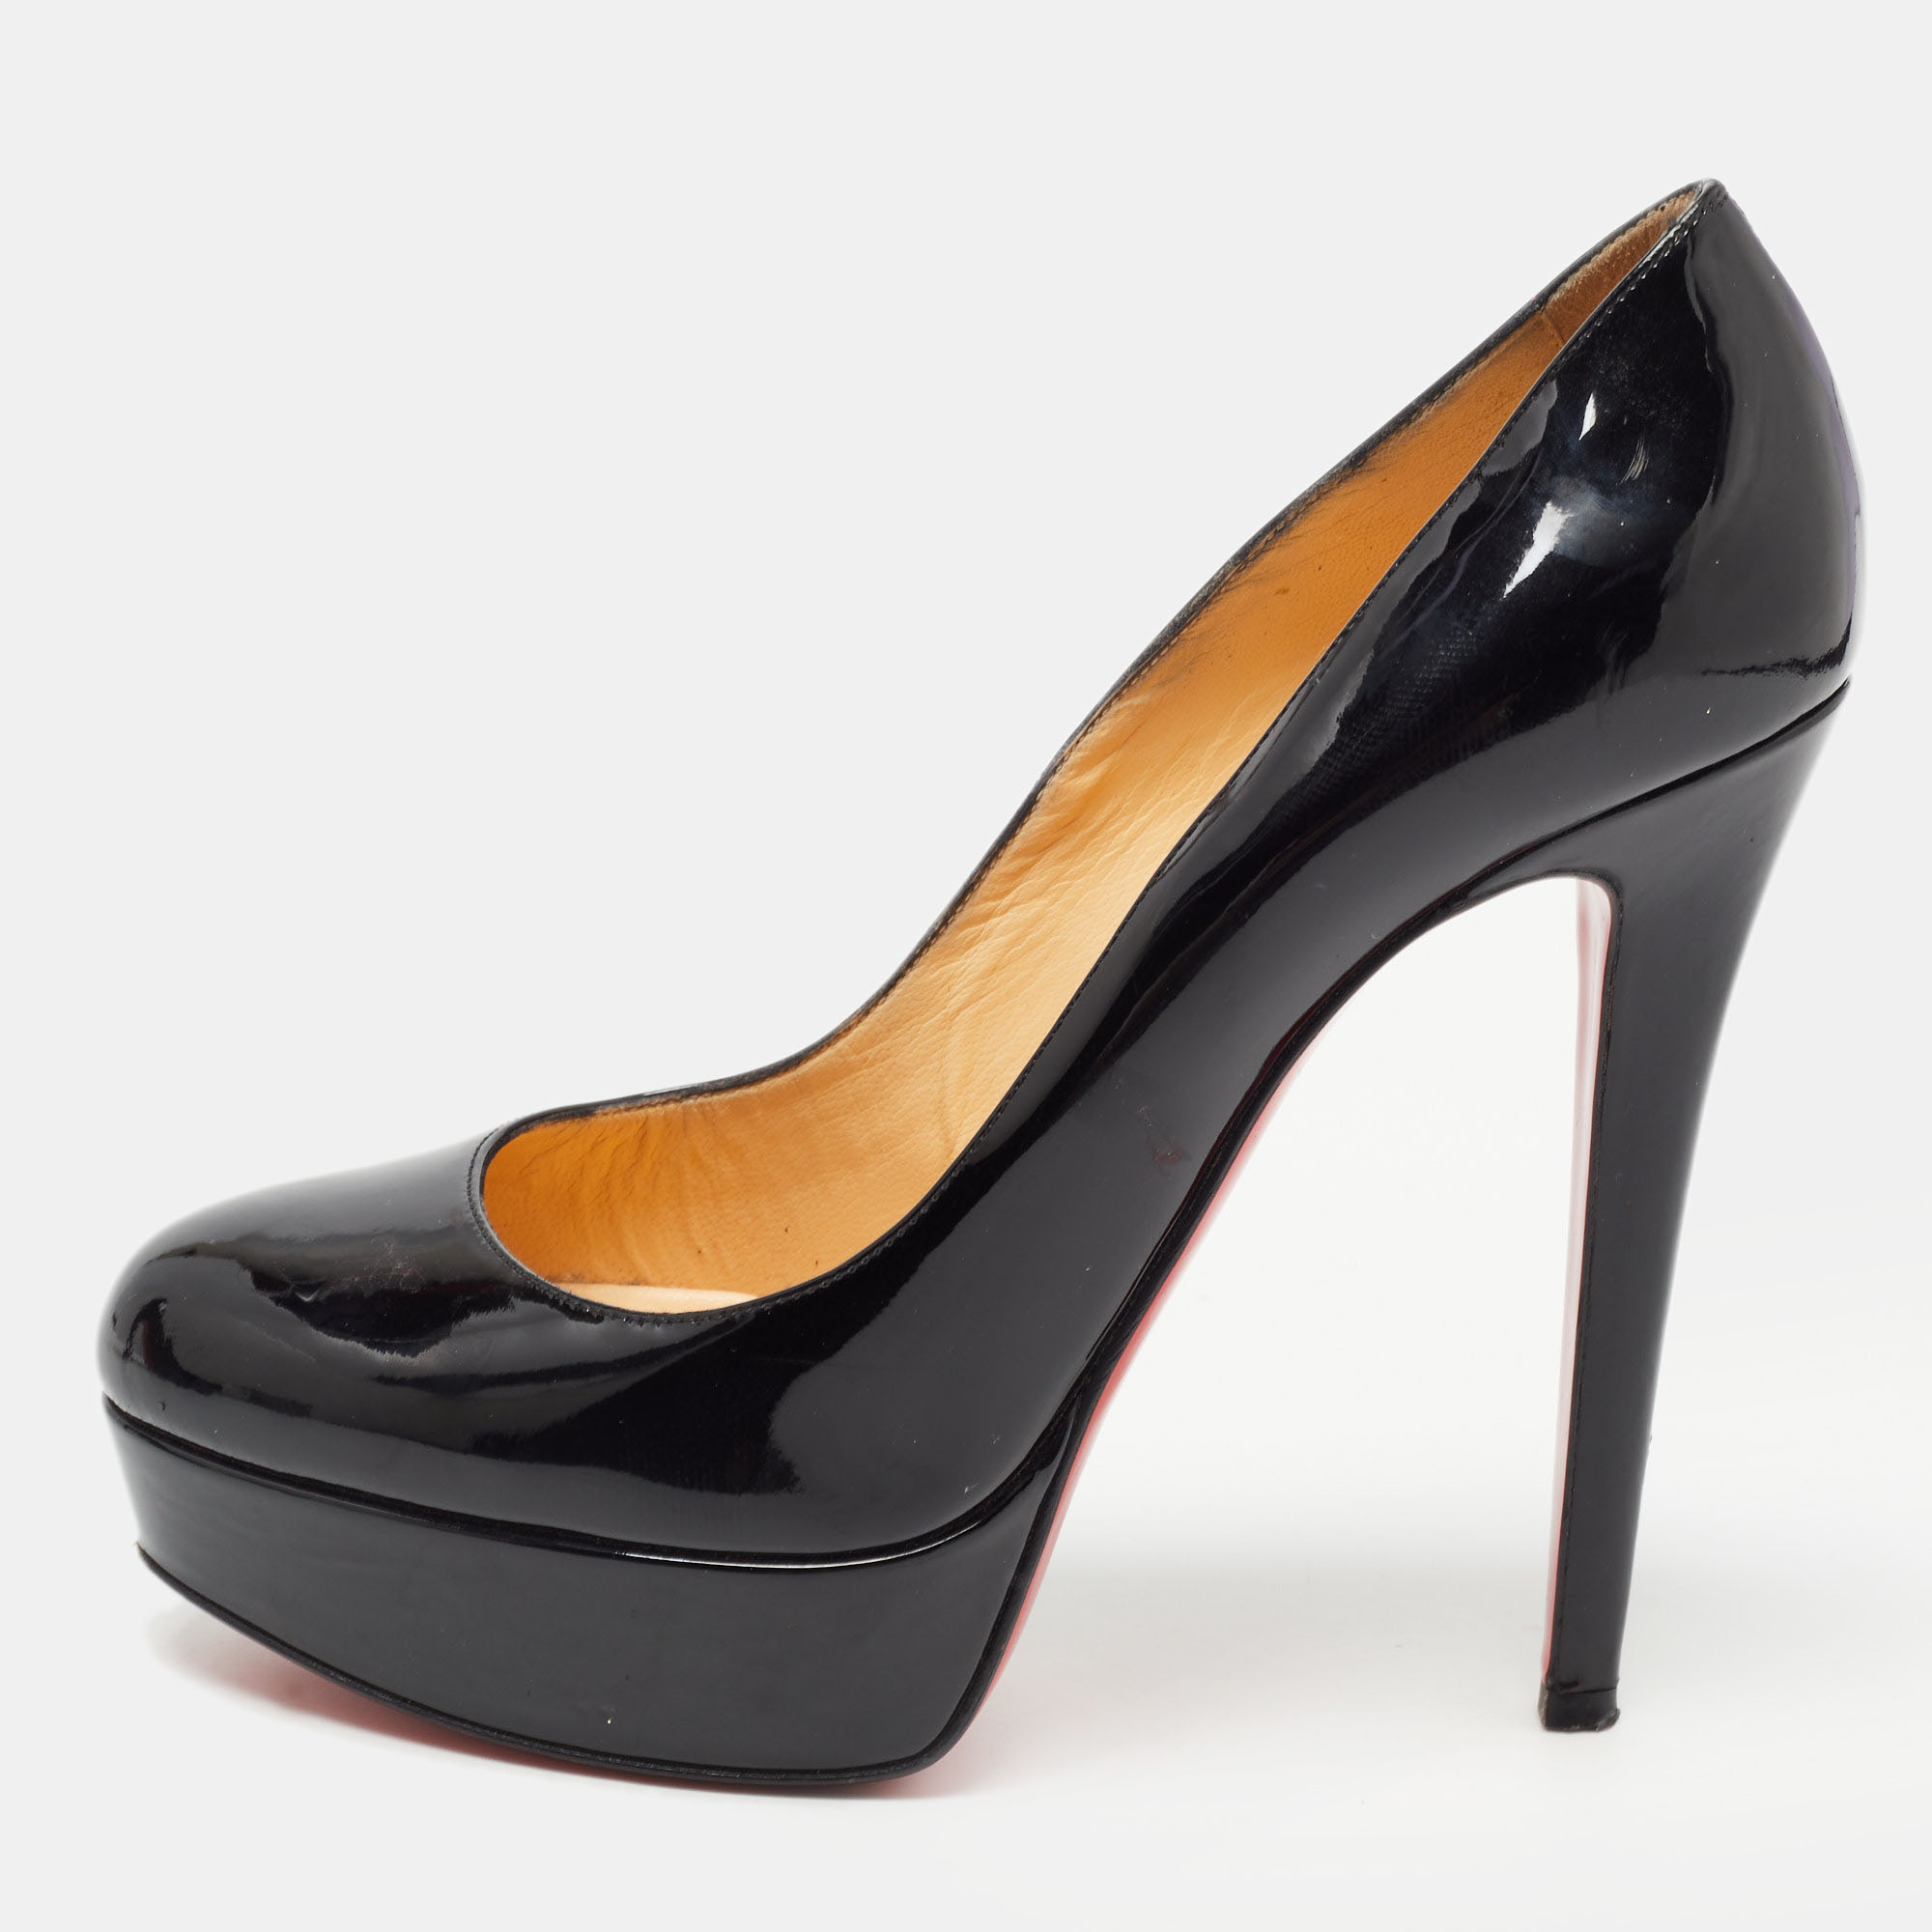 Pre-owned Christian Louboutin Black Patent Leather Bianca Pumps Size 38